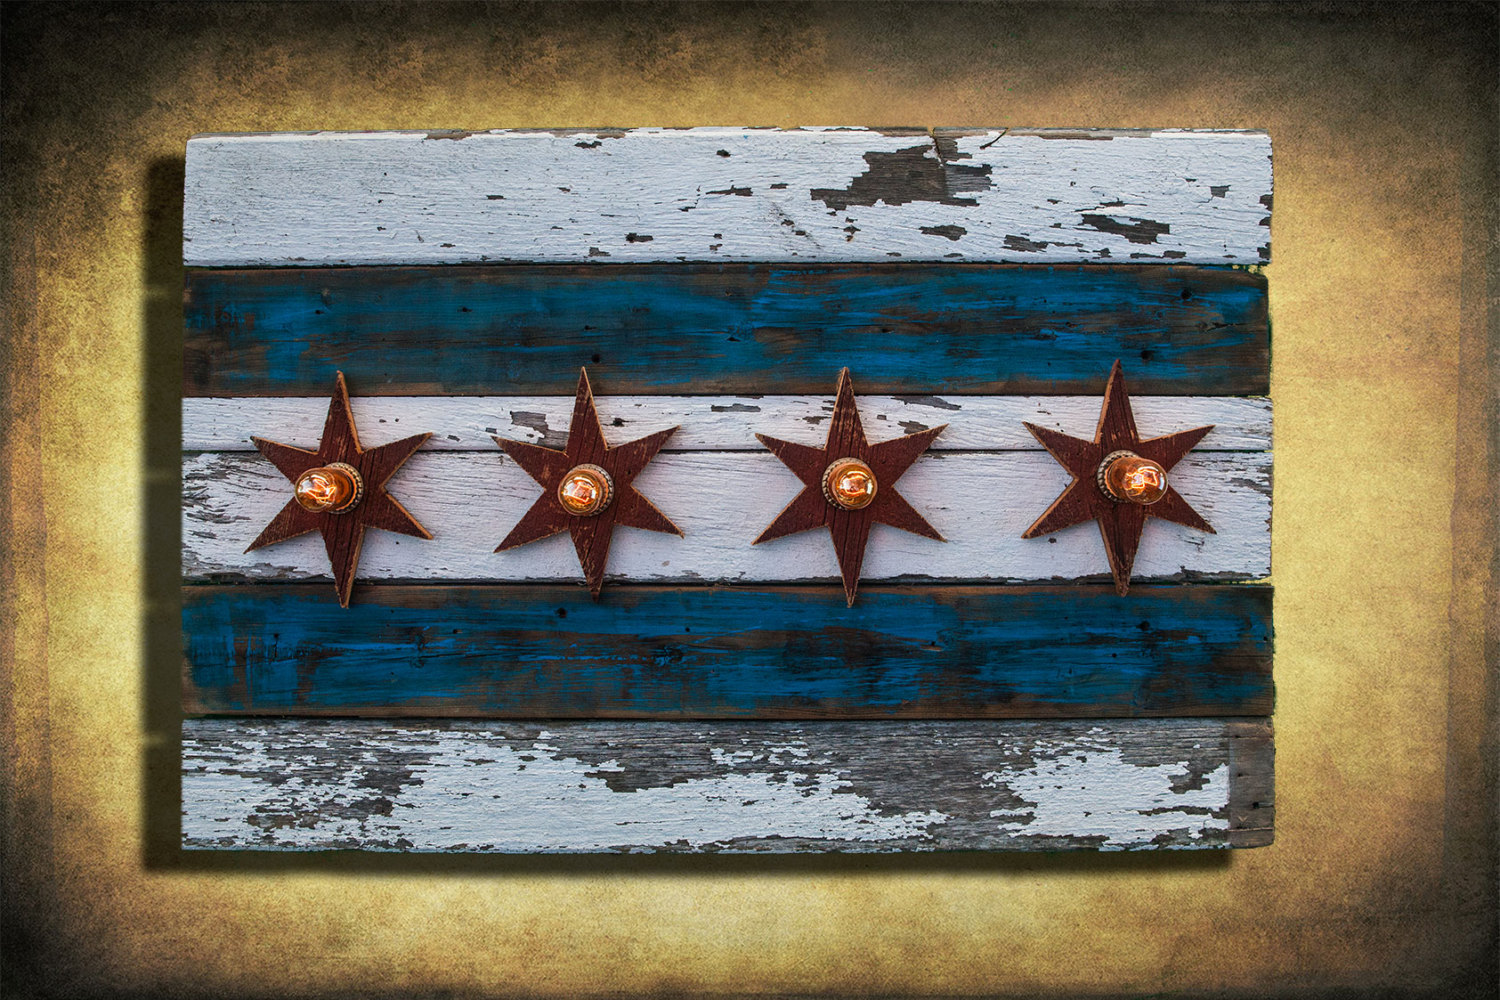 Chicago Flag One of a kind Barn Wood, Antique Edison light bulbs, Blue, red, Illinois,recycled, reclaimed, wooden, rustic